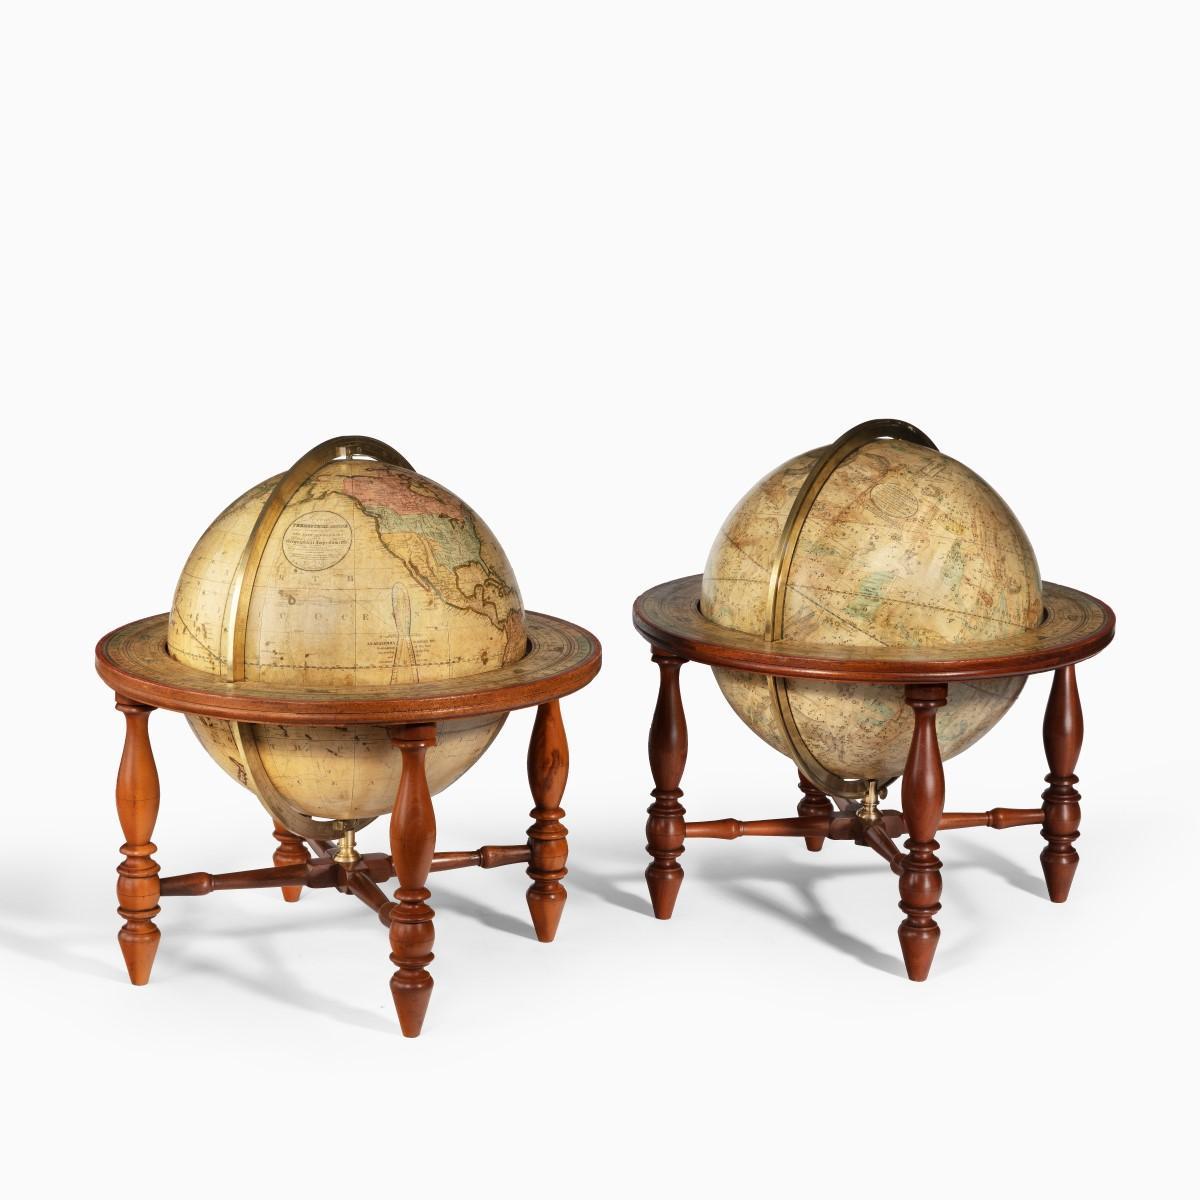 Fruitwood Pair of 12 Inch Table Globes by Josiah Loring Dated 1844 and 1841